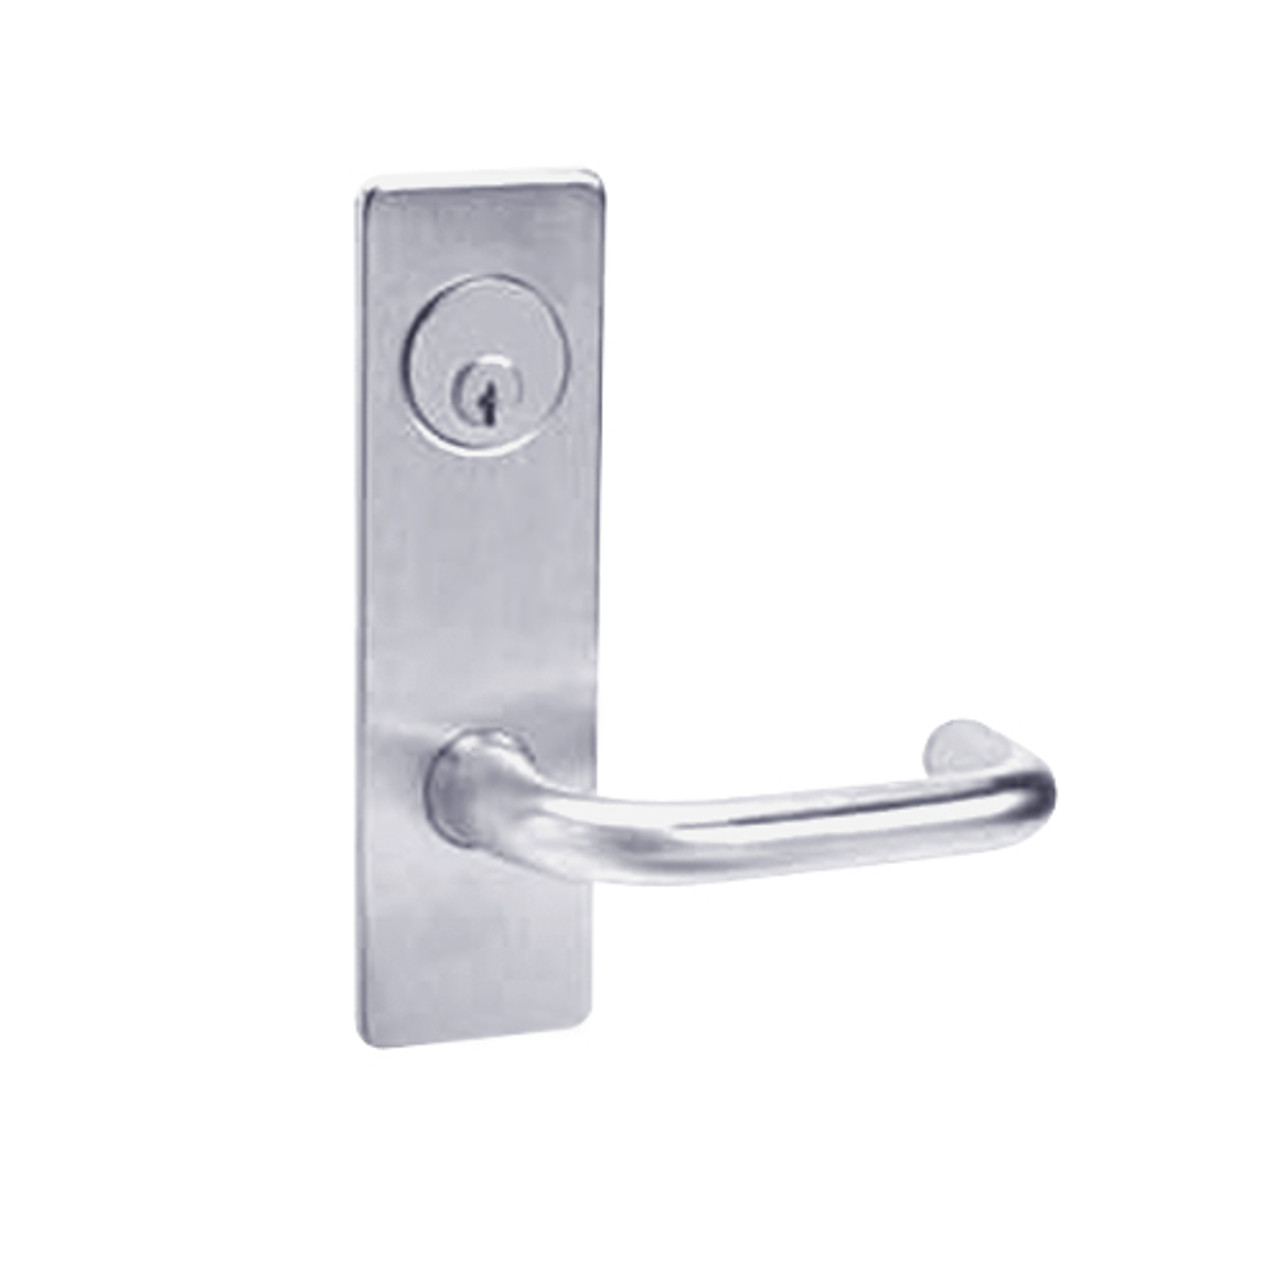 ML2048-LWP-626 Corbin Russwin ML2000 Series Mortise Entrance Locksets with Lustra Lever and Deadbolt in Satin Chrome